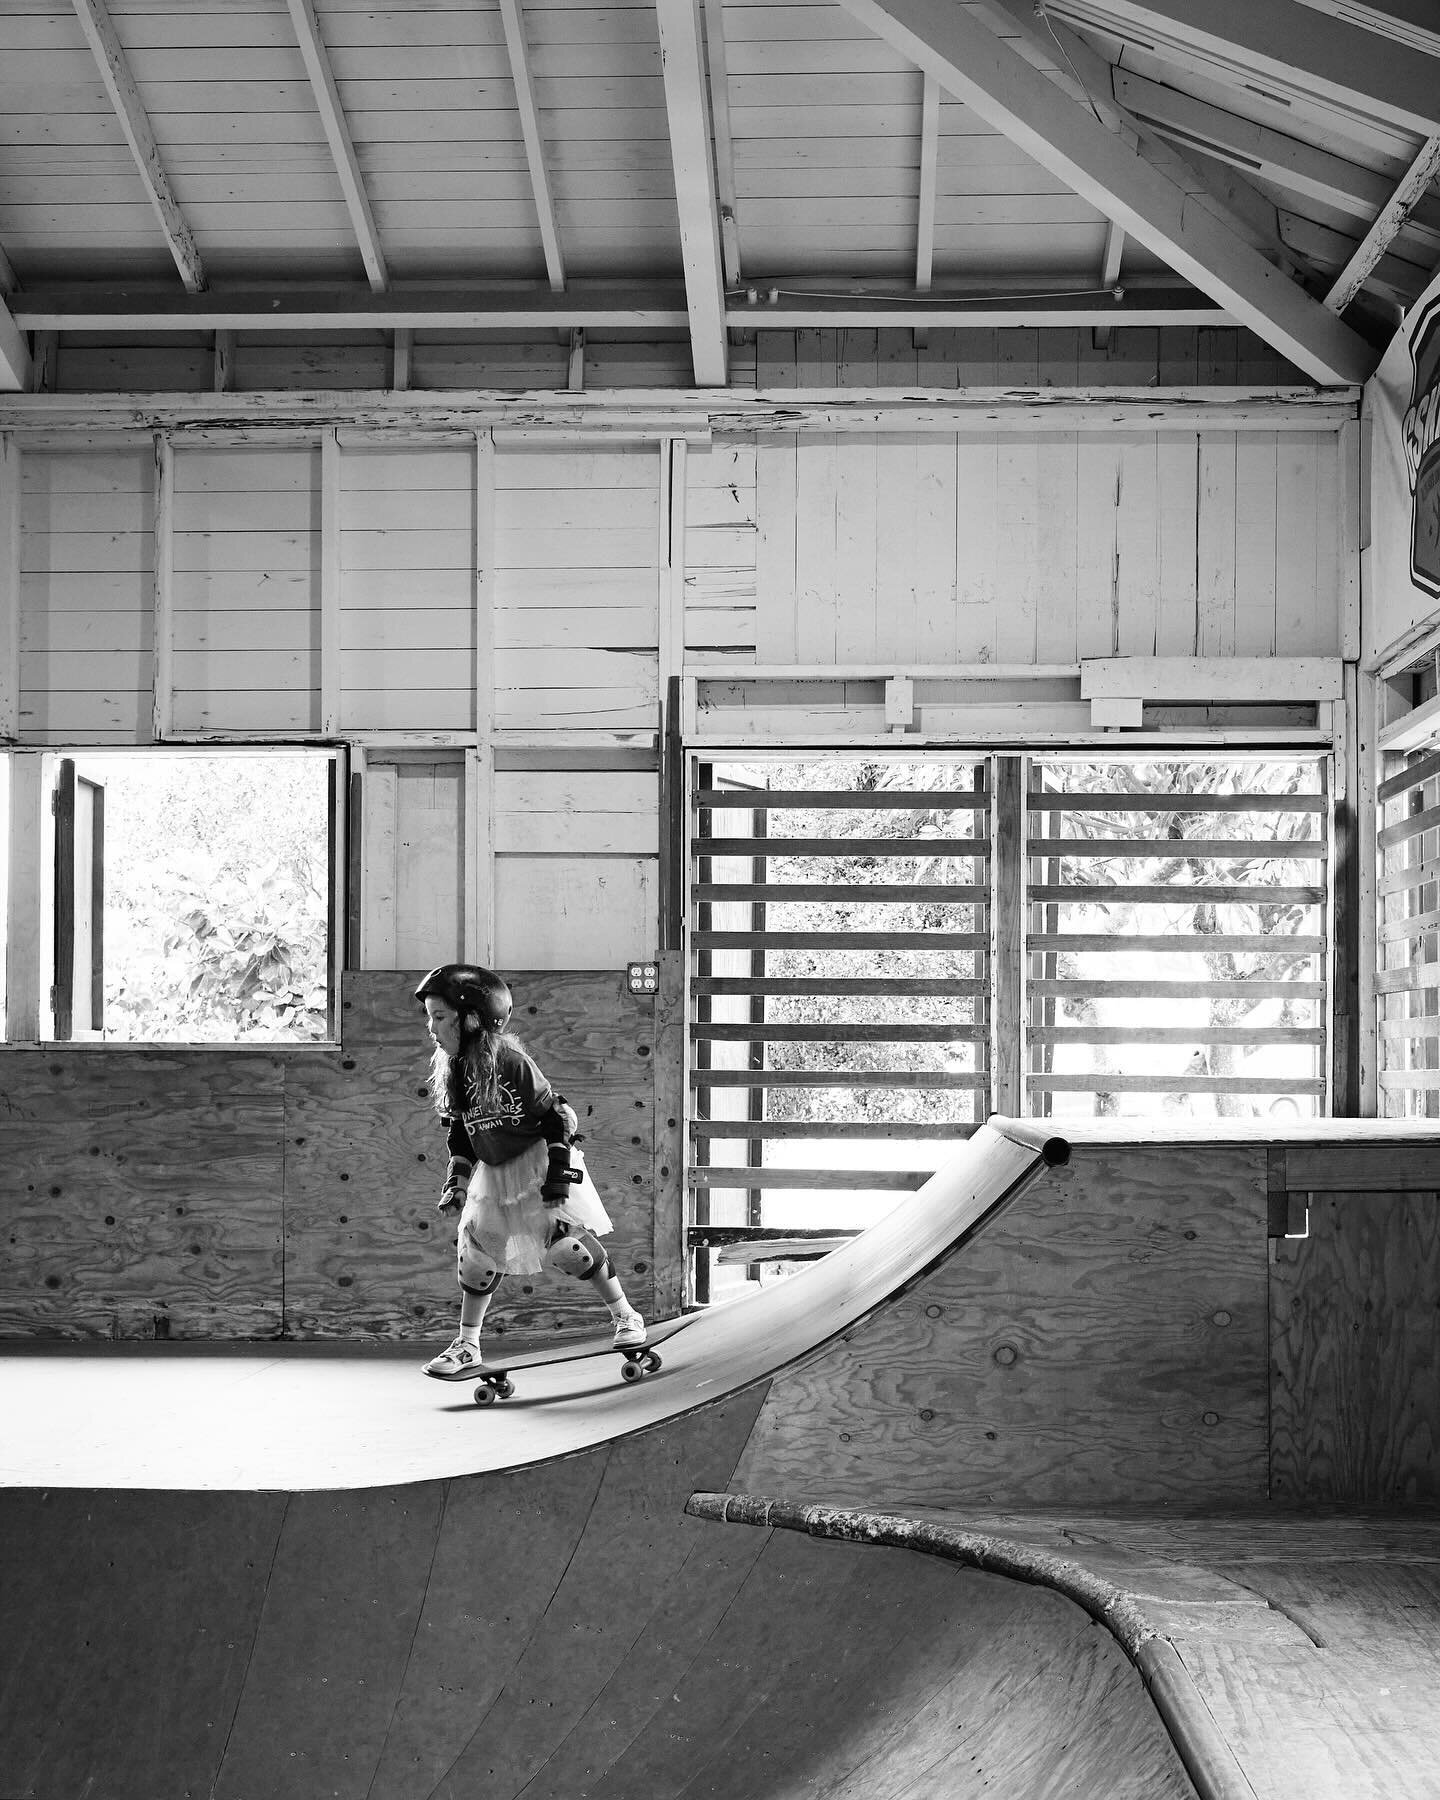 🛹 Proud dad moment 

A big thank you to Willy Akers @sunsetskates for teaching this little Grom how to skate. Looks like a mini ramp is in our near future.

Photo @treasurbite 

#willyakers #lennonashleylett